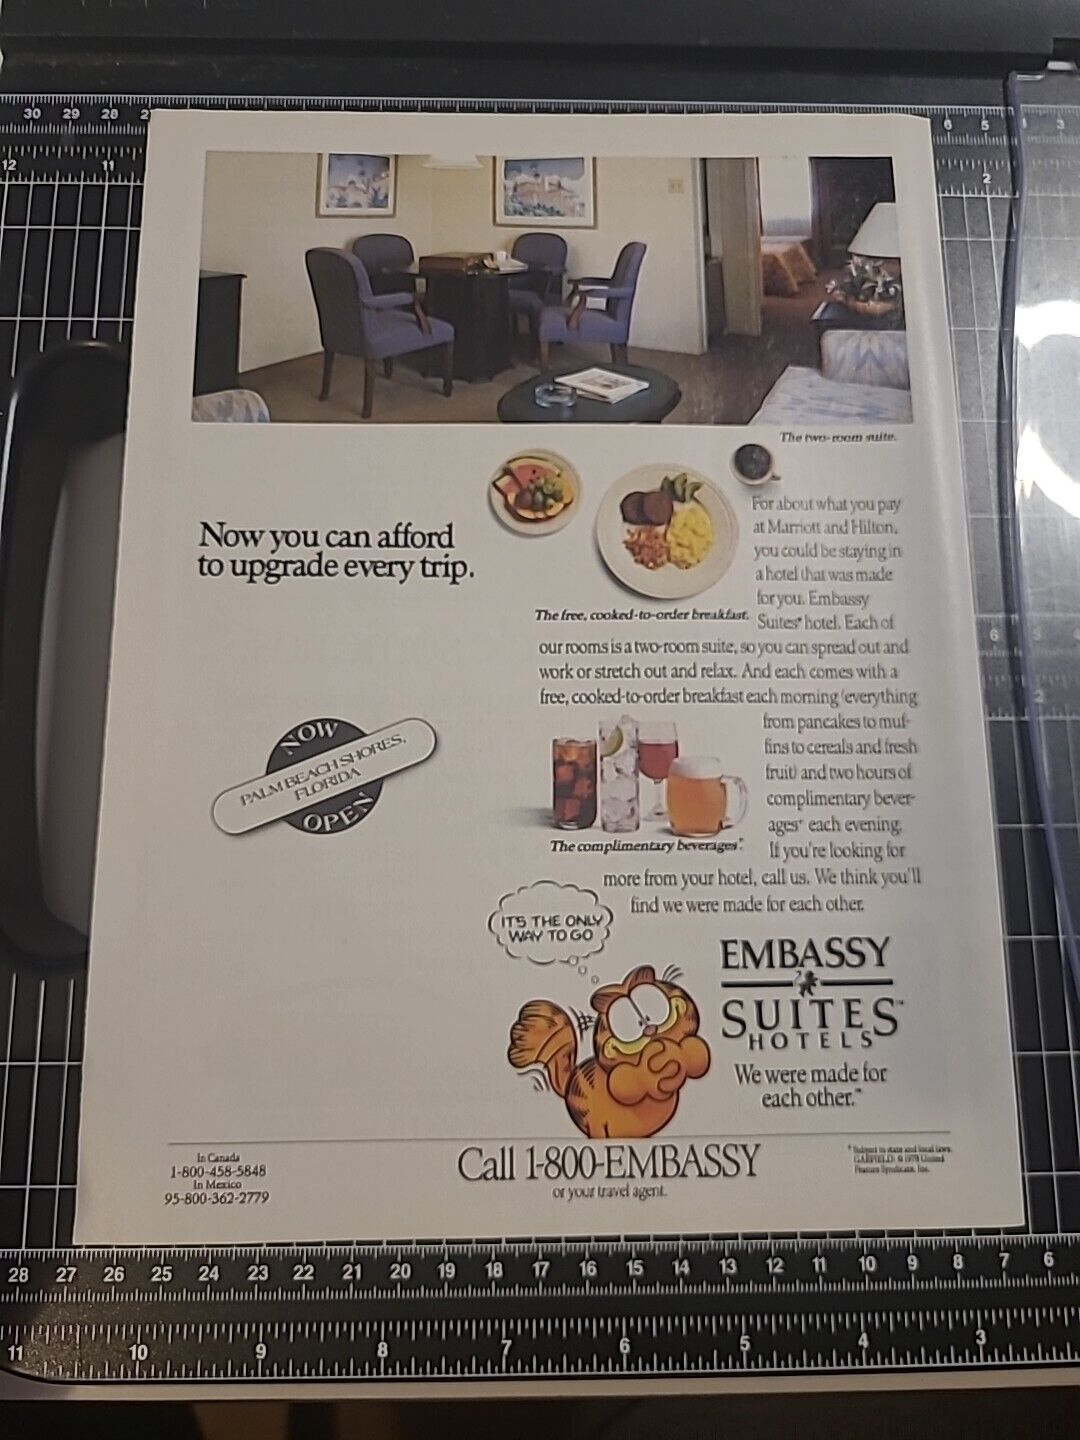 Embassy Suites Hotels Garfield Cat Print Ad 1991 8x11 Vintage Great To Frame 